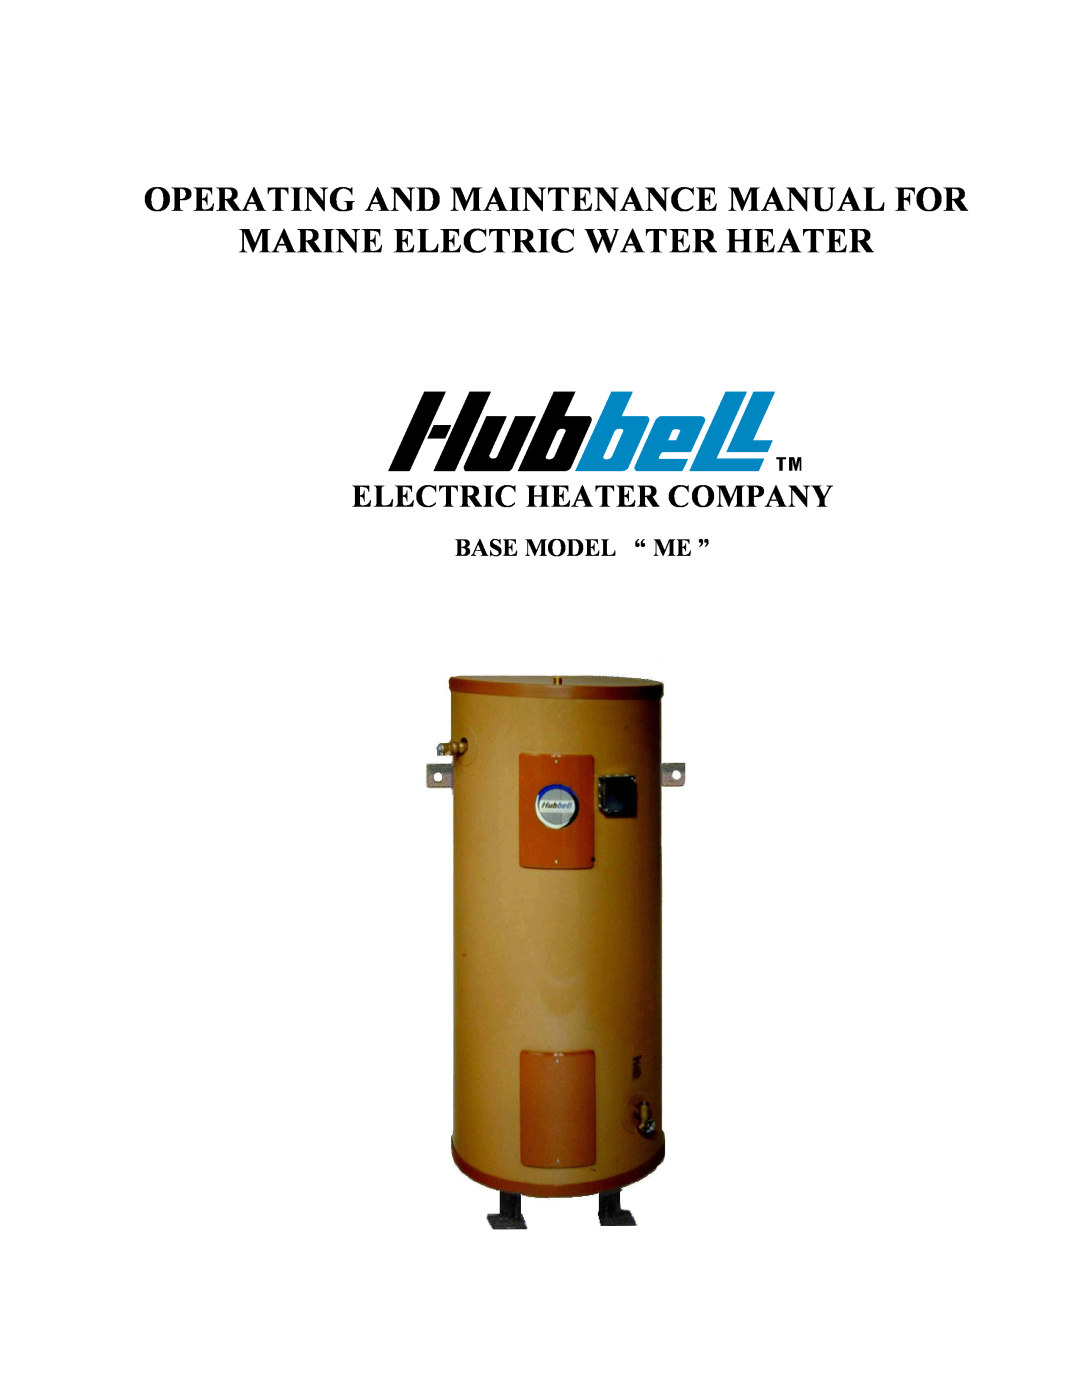 Hubbell Electric Heater Company ME manual Base Model “ Me ”, Operating And Maintenance Manual For, Electric Heater Company 